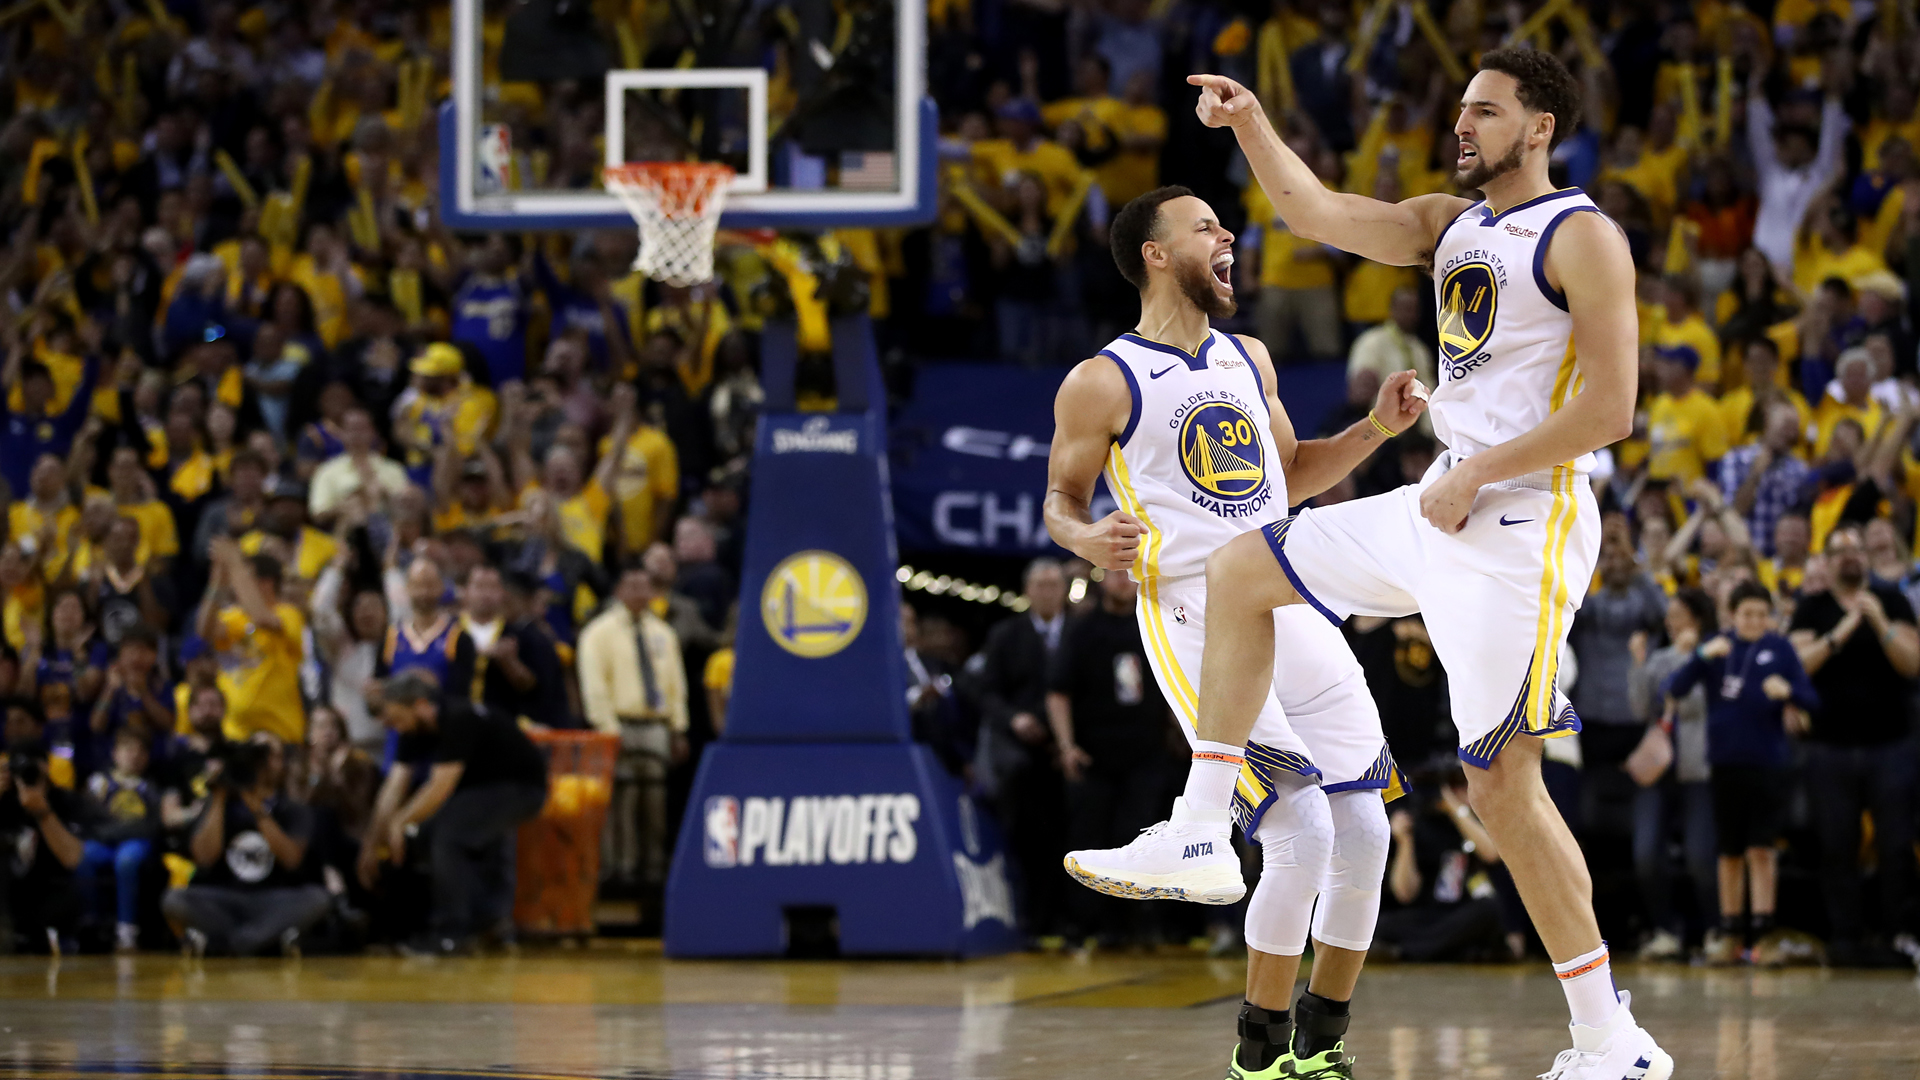 Steph Curry excited for Klay Thompson's return from unfair injuries Sports Bay Area